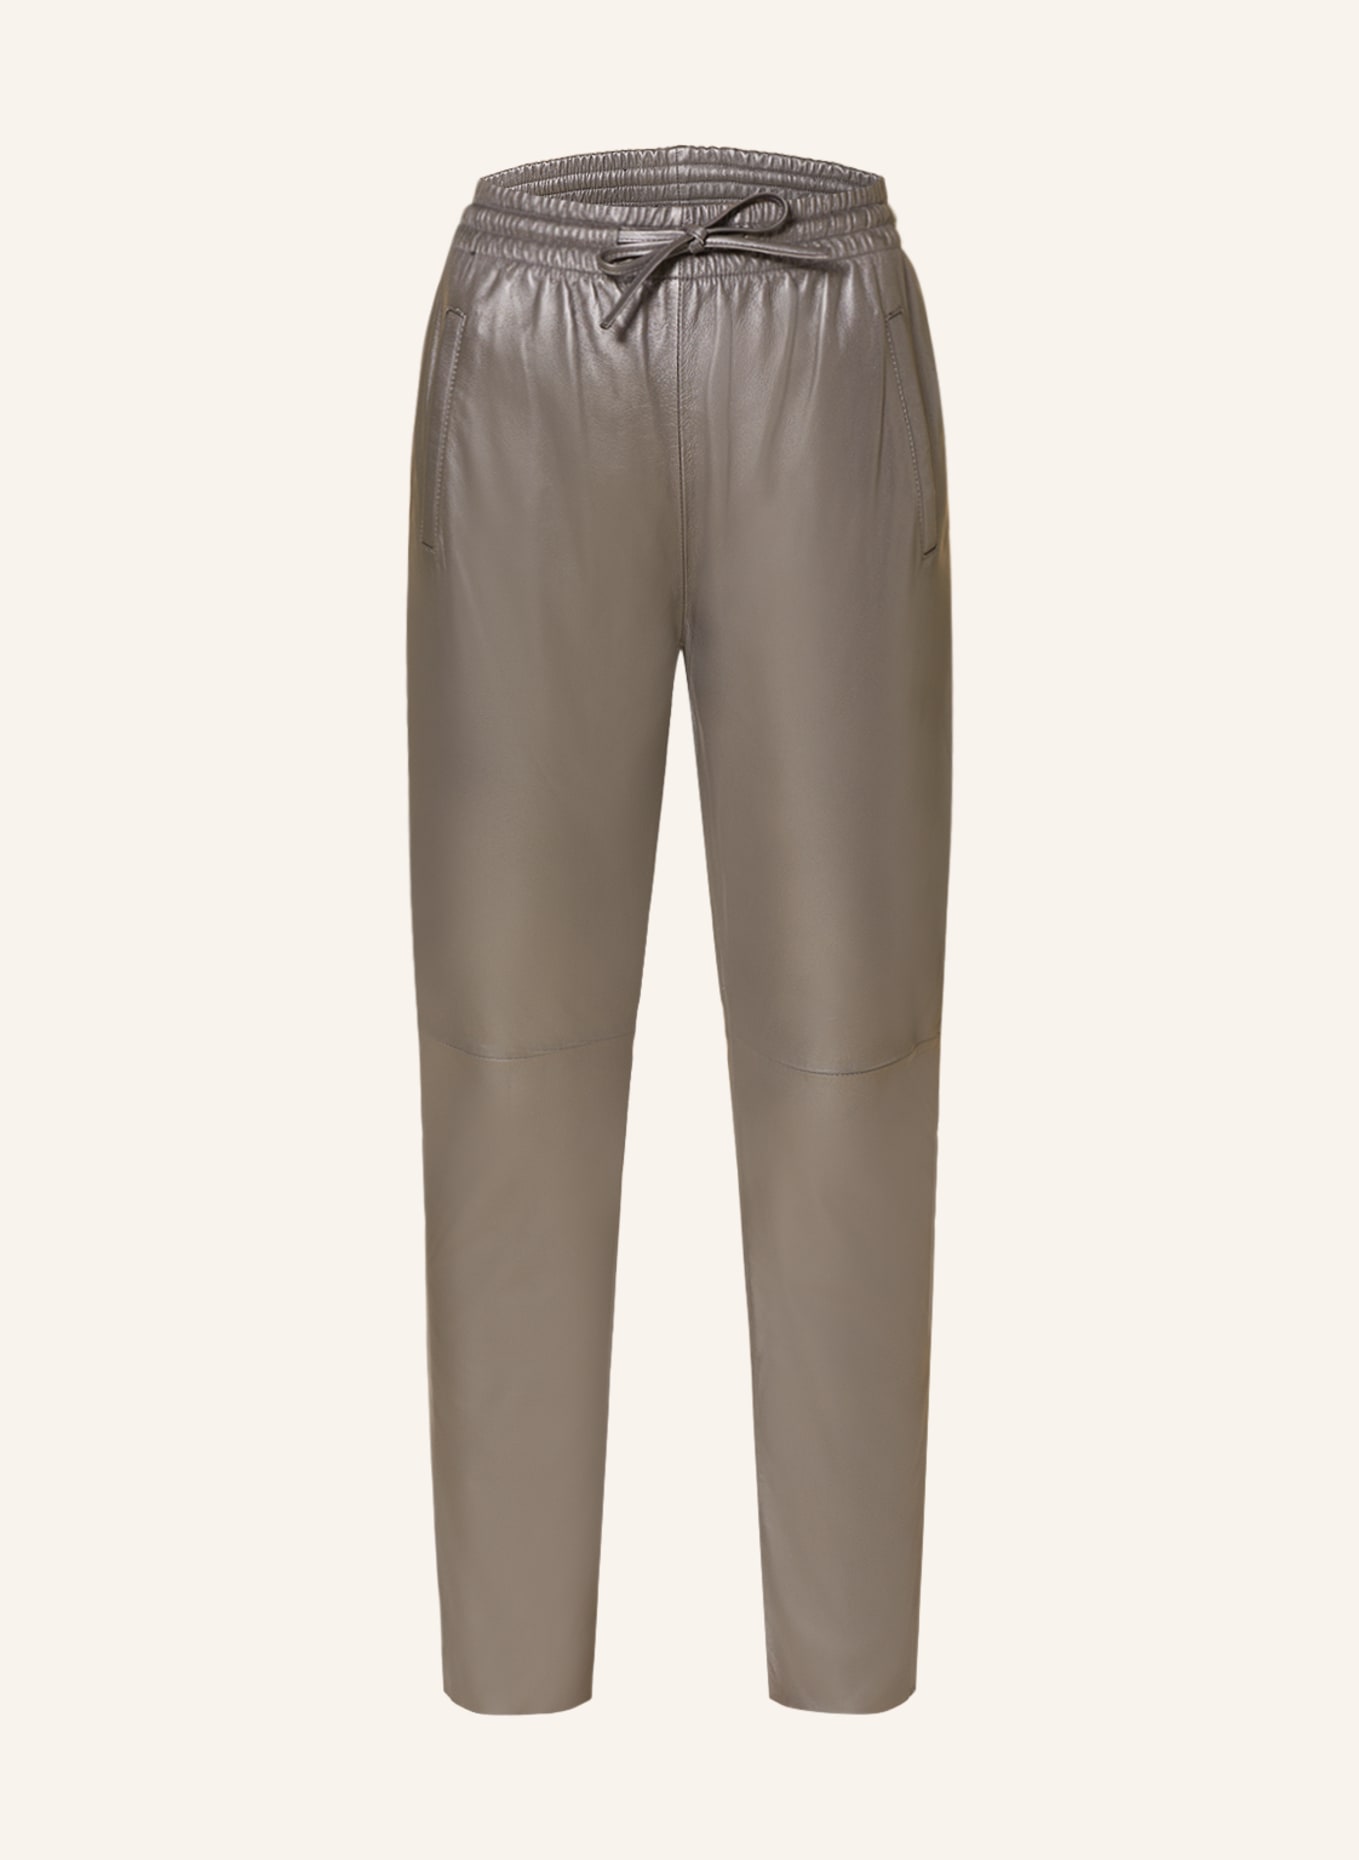 OAKWOOD 7/8 leather trousers in jogger style, Color: GRAY (Image 1)